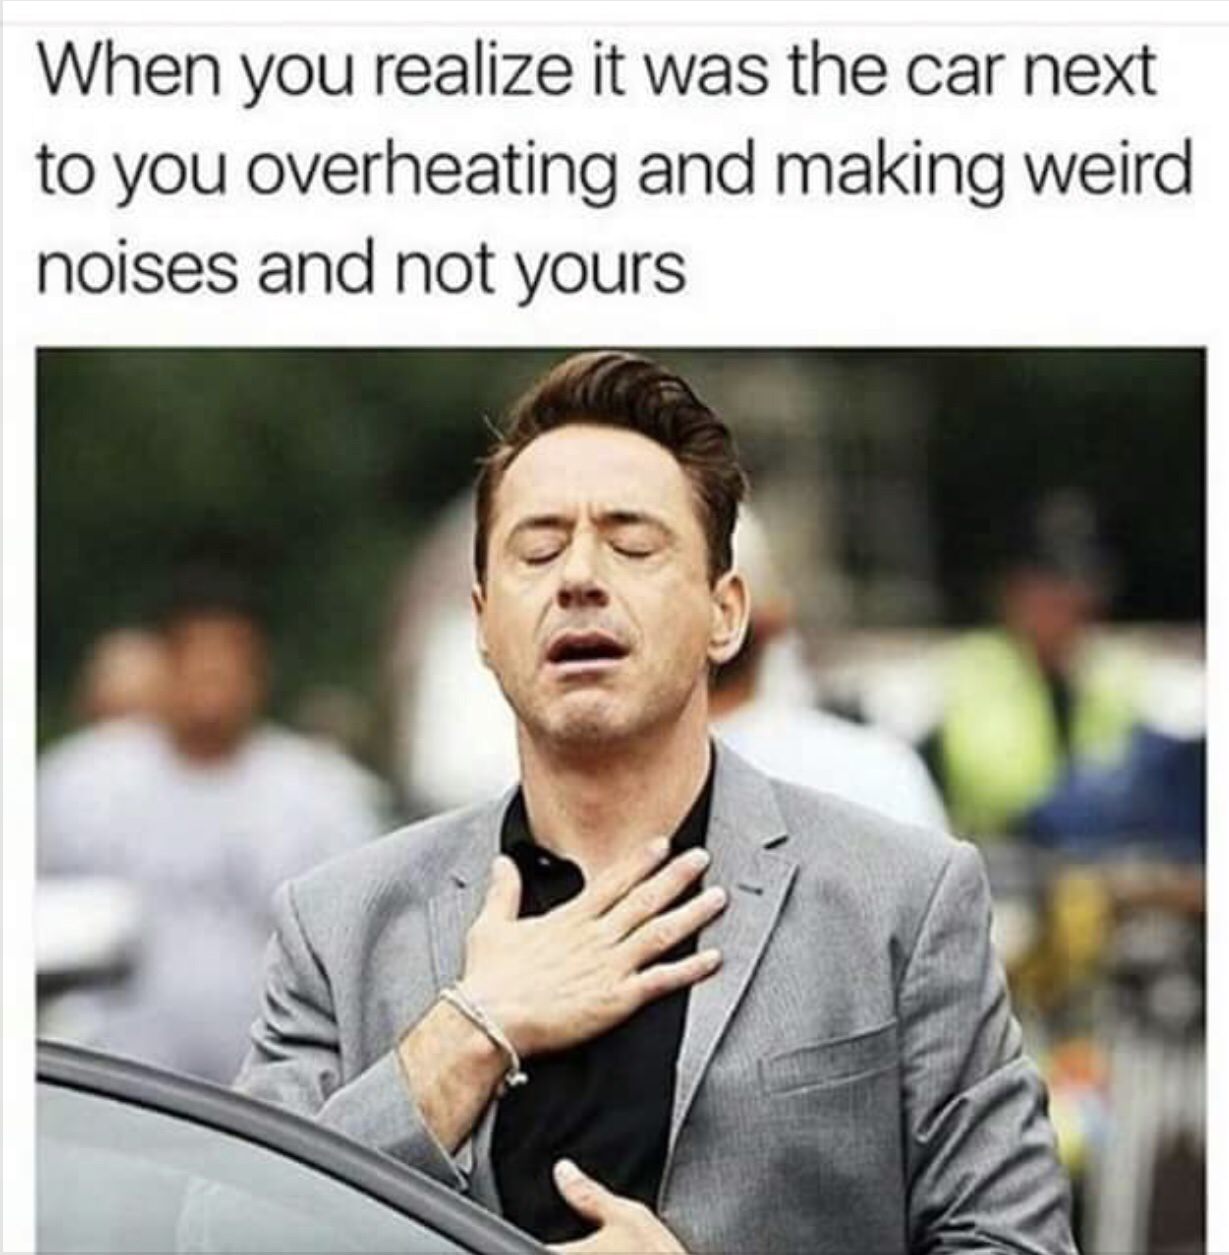 unexpected expenses meme - When you realize it was the car next to you overheating and making weird noises and not yours